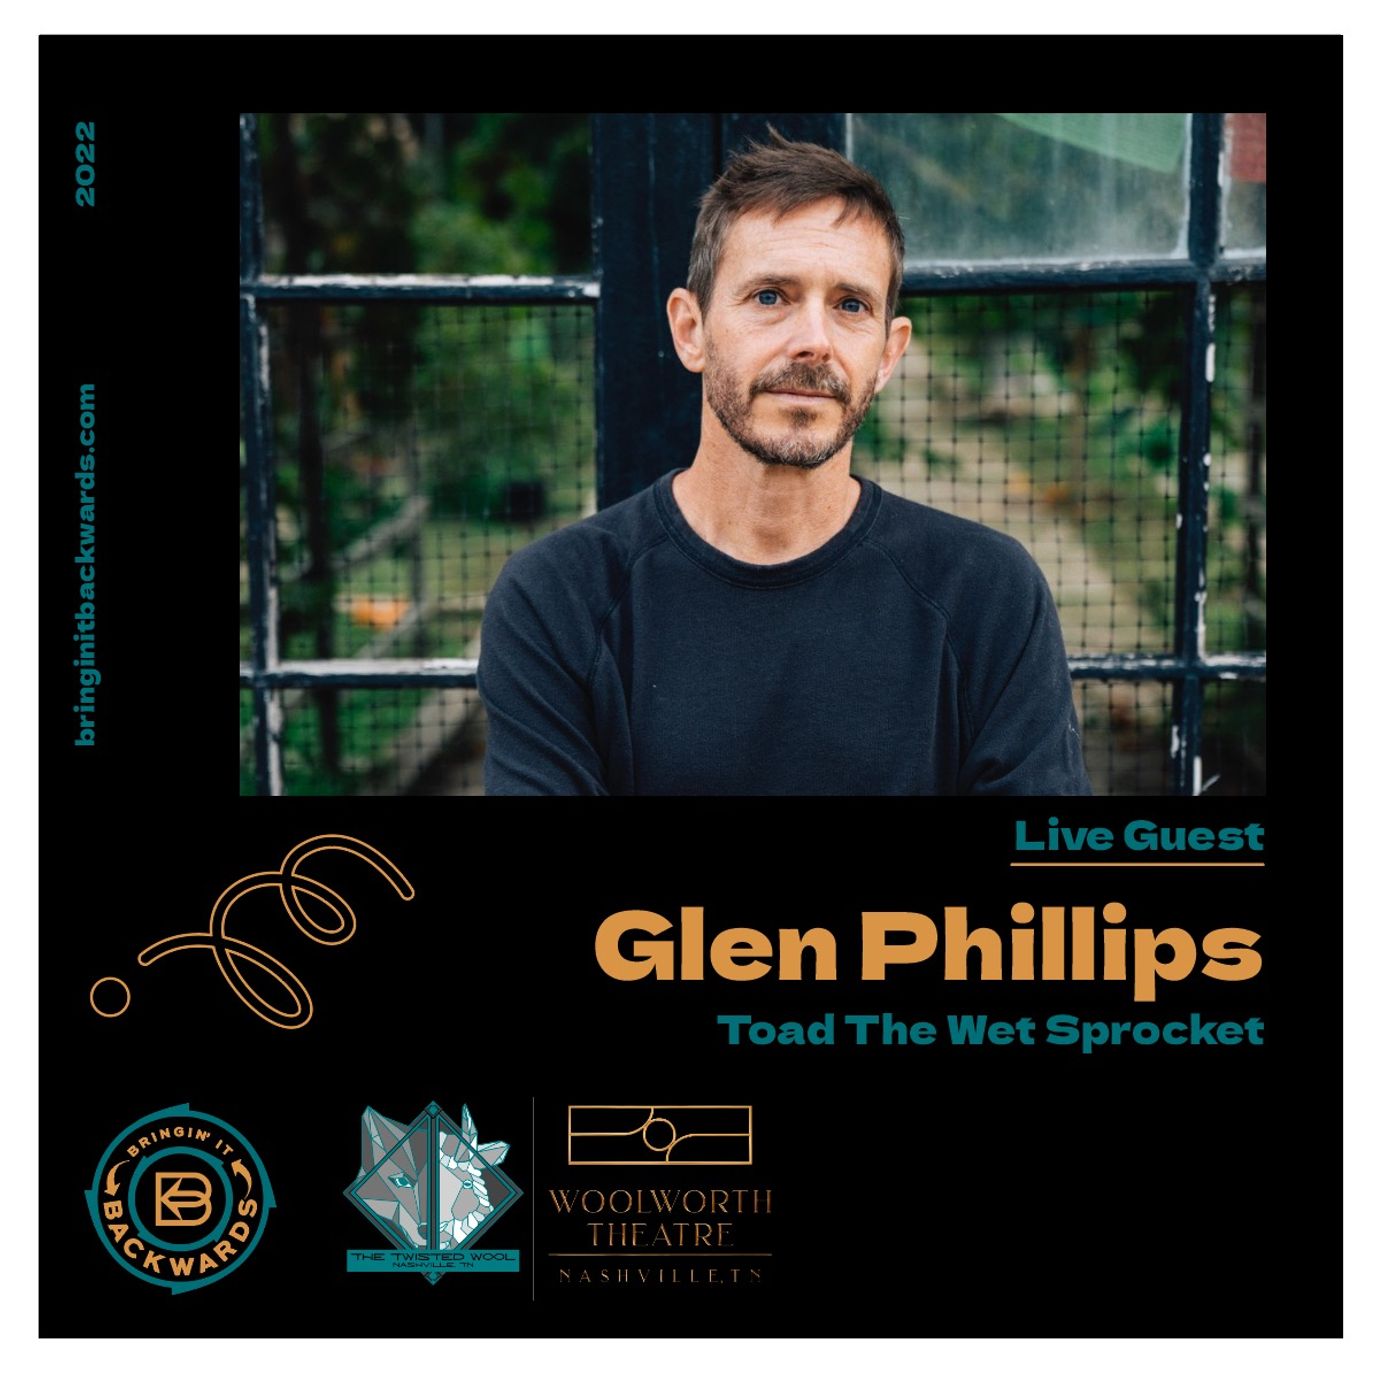 Interview with Glen Phillips of TOAD The Wet Sprocket